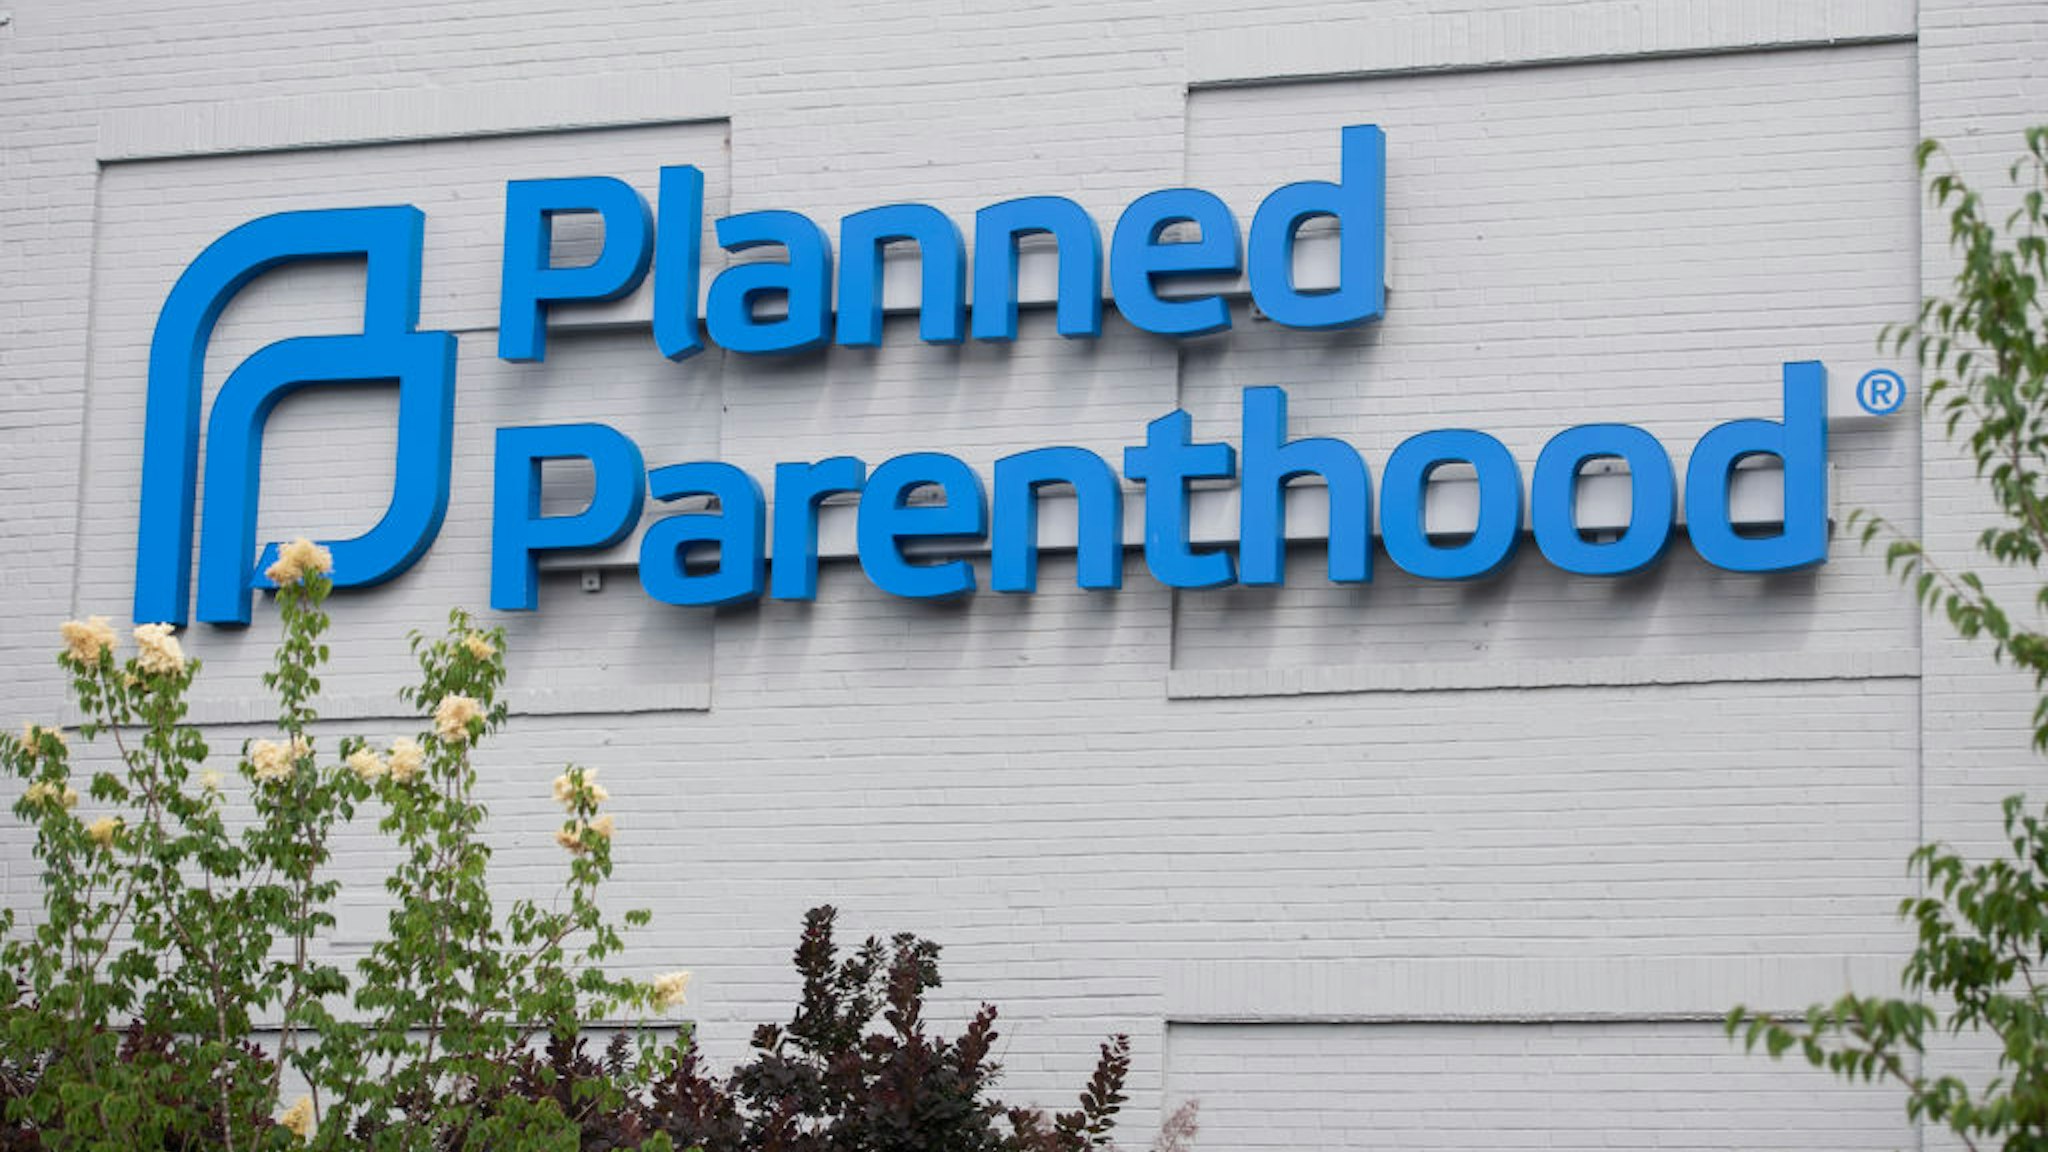 The logo of Planned Parenthood is seen outside the Planned Parenthood Reproductive Health Services Center in St. Louis, Missouri, May 30, 2019, the last location in the state performing abortions. - A US court weighed the fate of the last abortion clinic in Missouri on May 30, with the state hours away from becoming the first in 45 years to no longer offer the procedure amid a nationwide push to curtail access to abortion. (Photo by SAUL LOEB / AFP) (Photo credit should read SAUL LOEB/AFP via Getty Images)